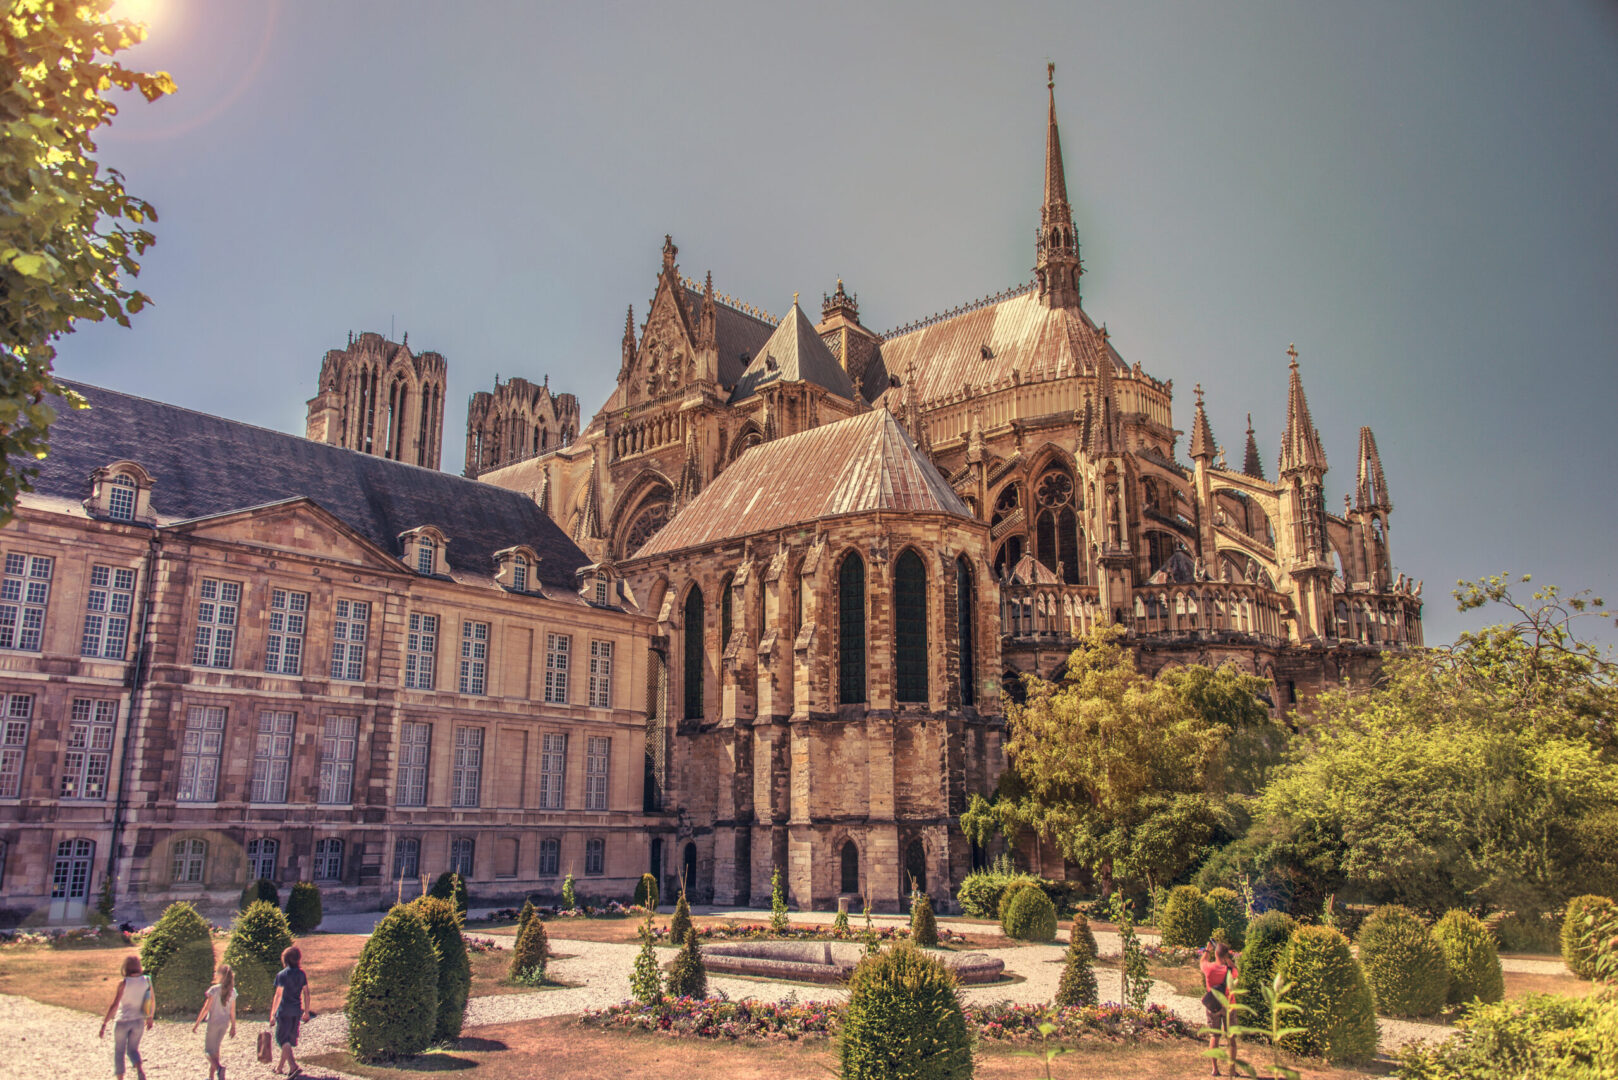 Reims Cathedrale